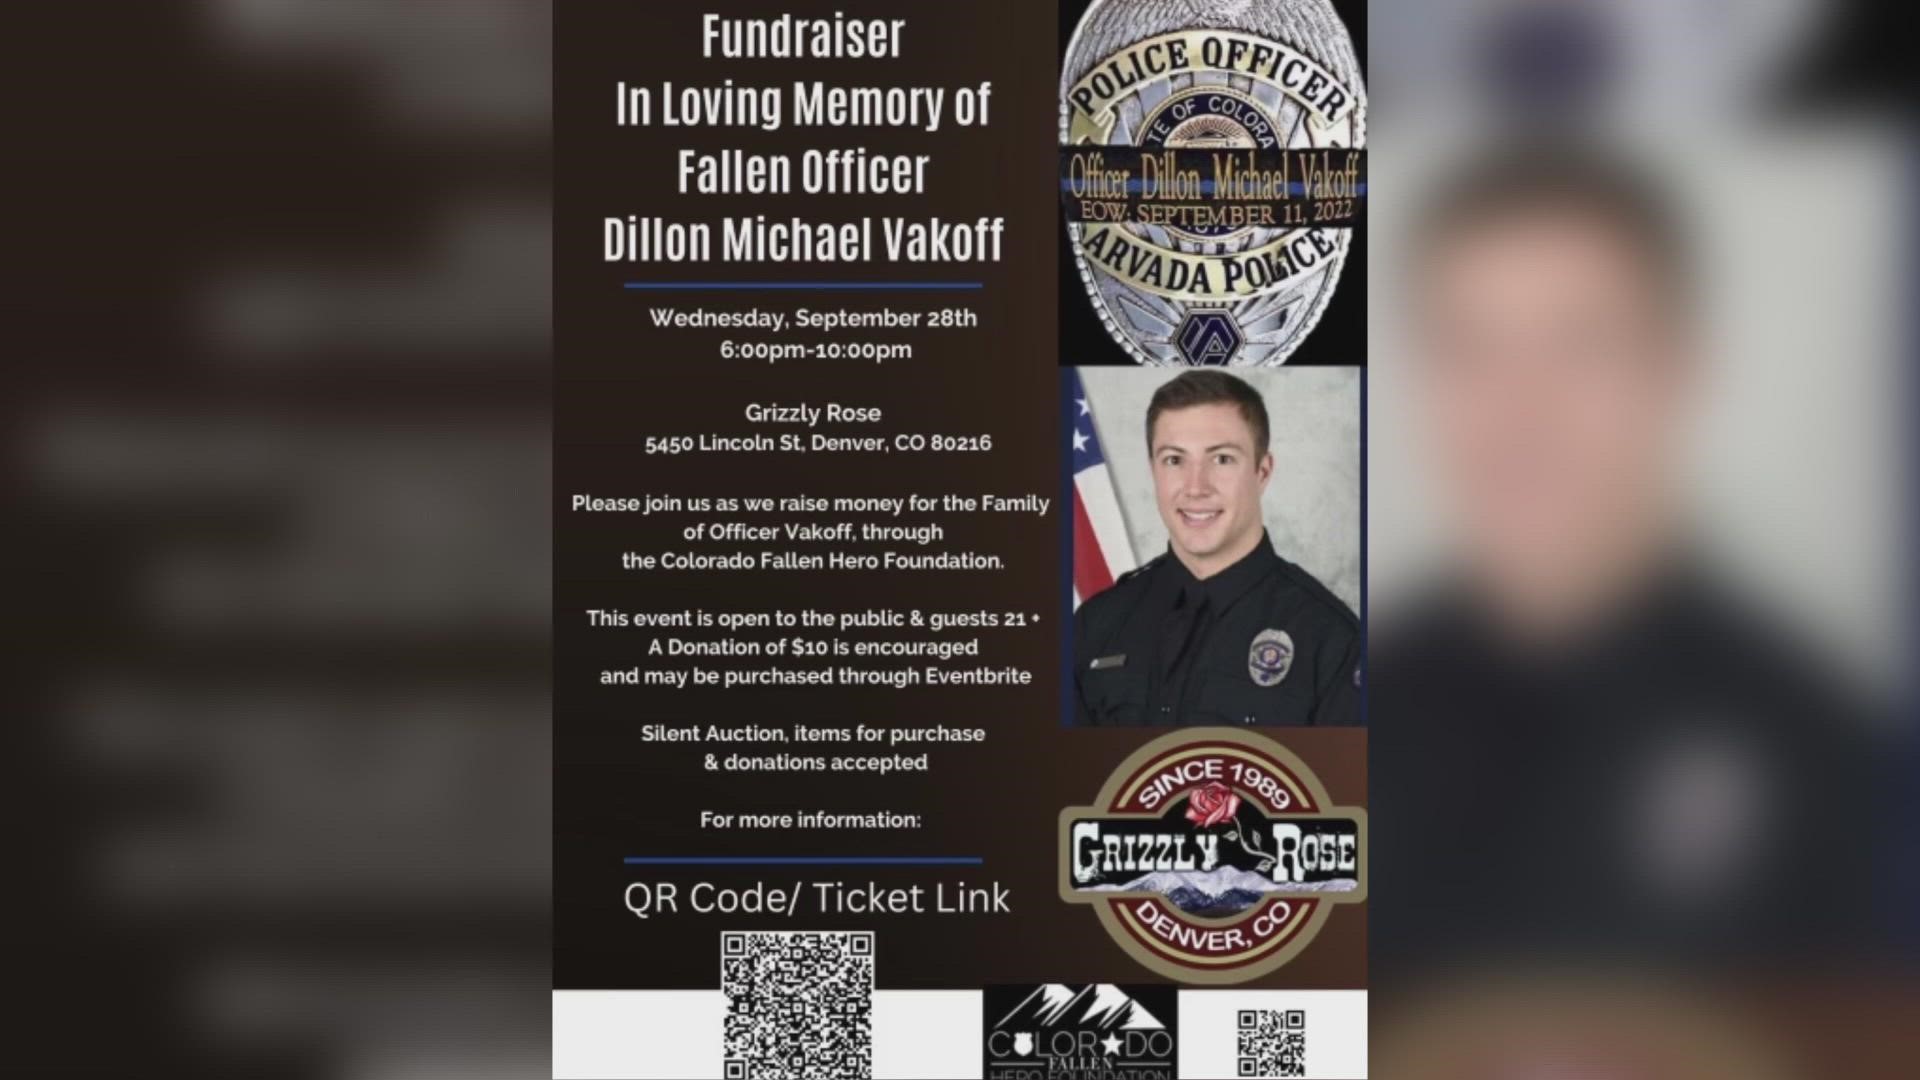 A fundraiser will be held Wednesday at the Grizzly Rose for Arvada Police Officer Dillon Vakoff, who was killed during a response to a domestic disturbance call.